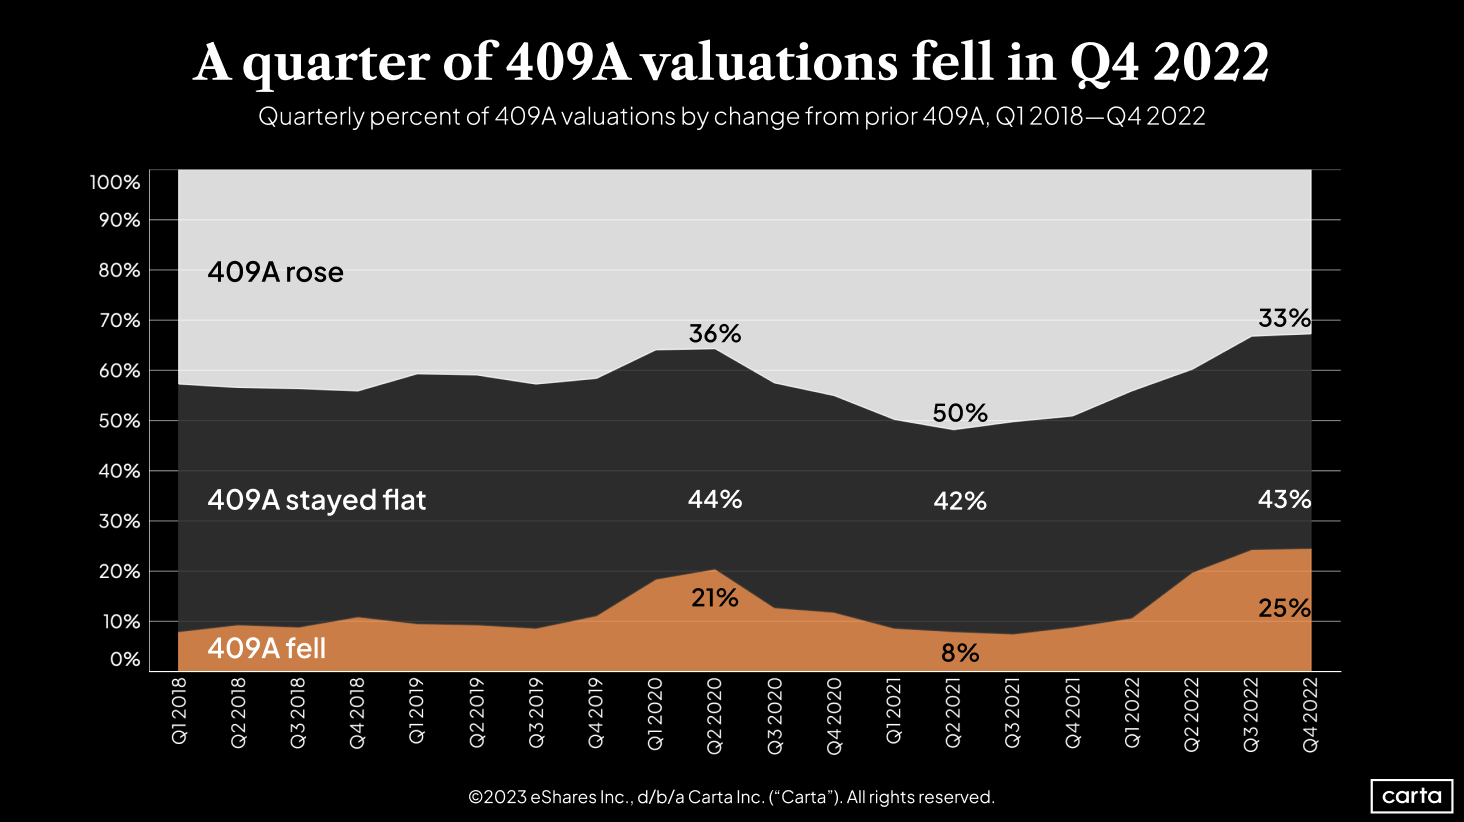 Quarterly percent of 409A valuations by change from prior 409A, Q1 2018-Q4 2022